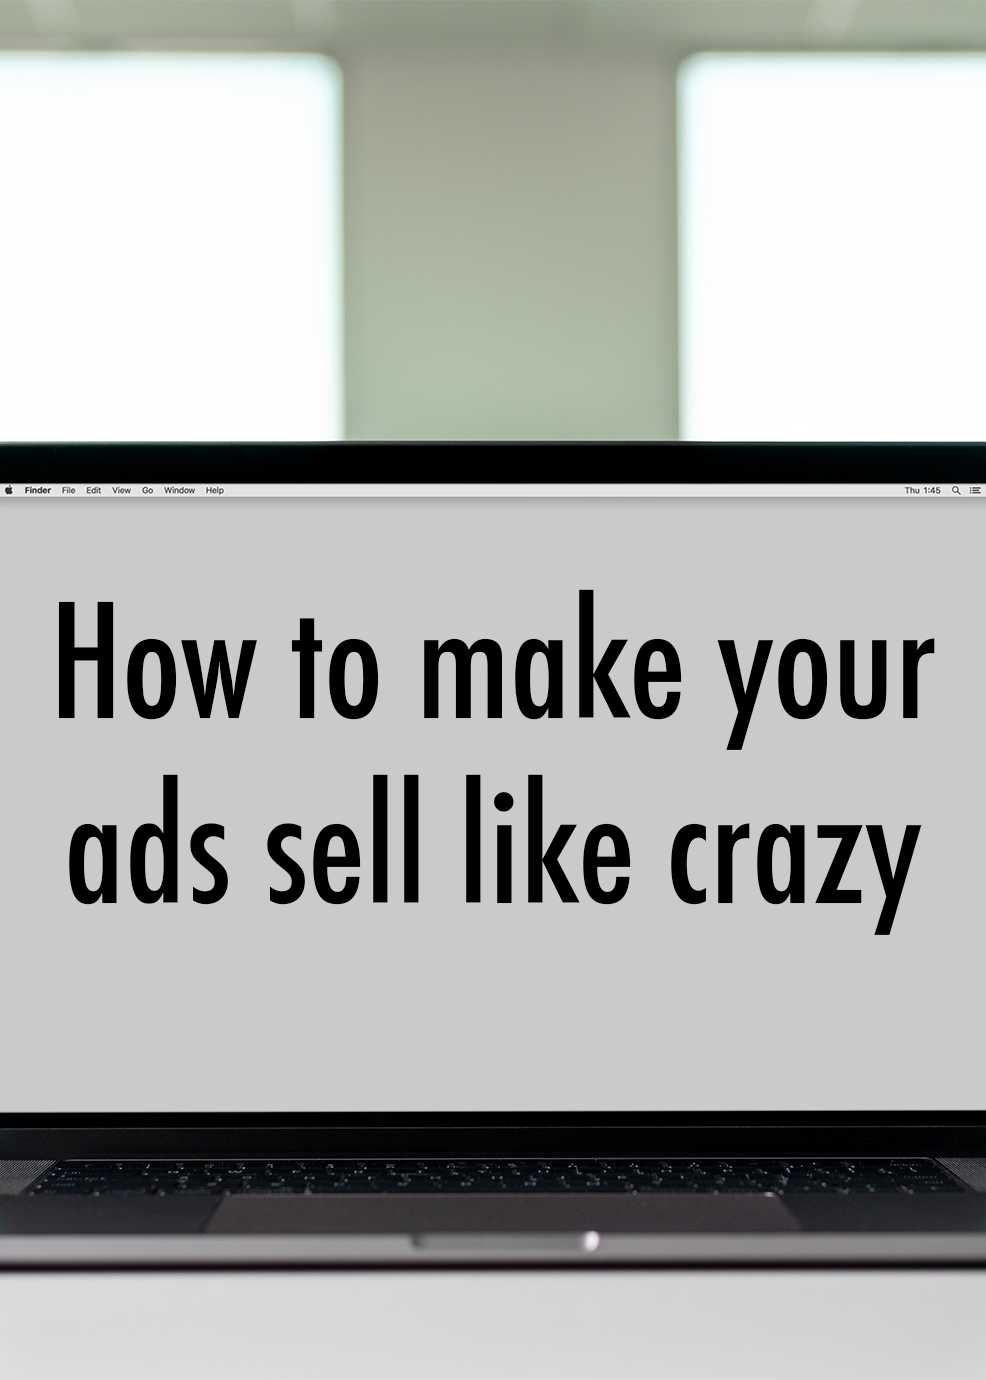 How to Make Your Ads Sell Like Crazy